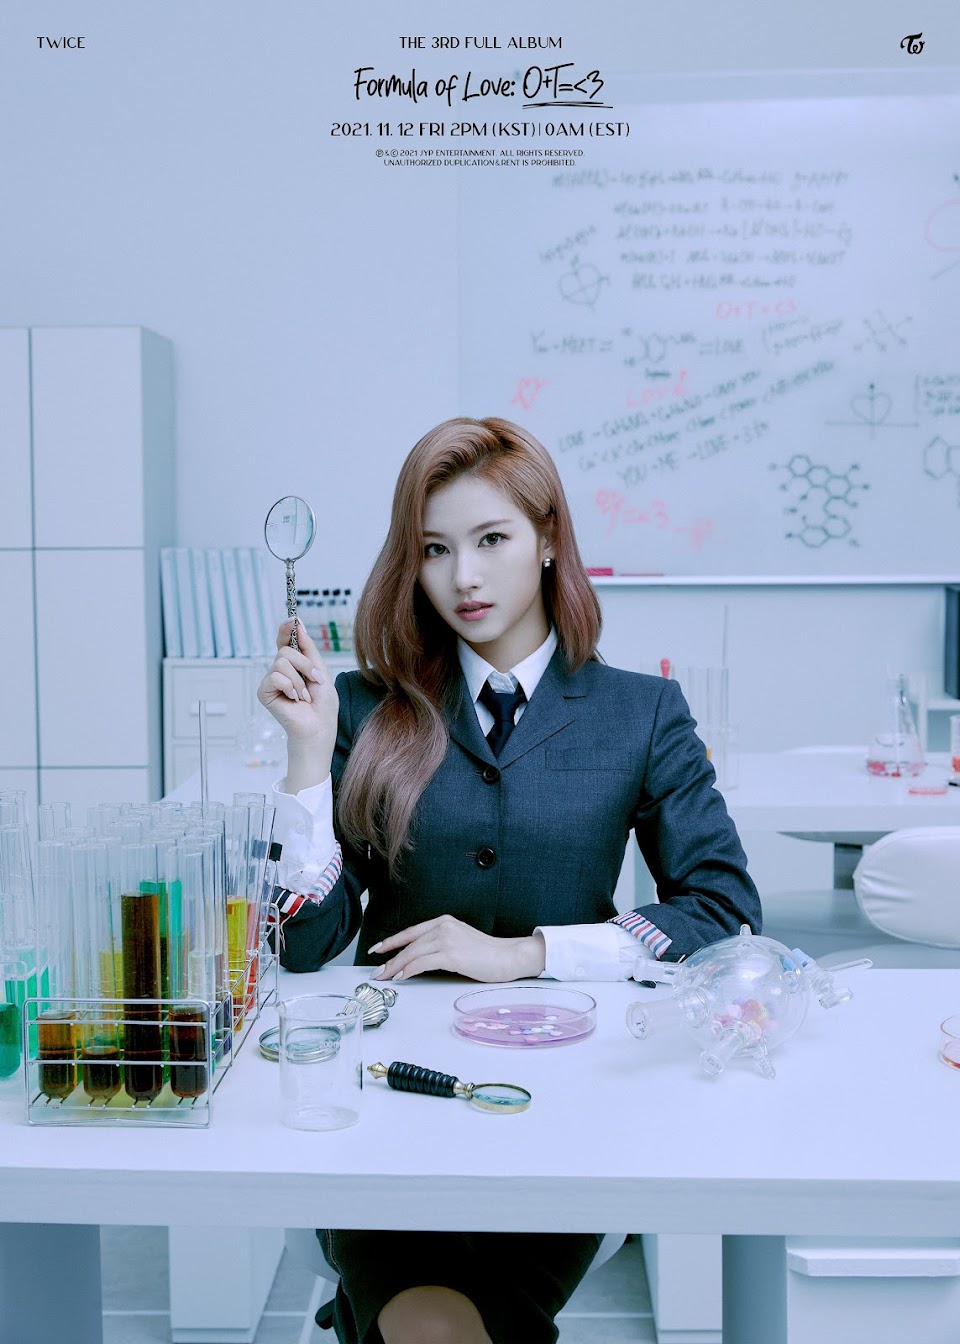 TWICE Transforms Into, Stunning Scientists In New Formula Of Love: O T=